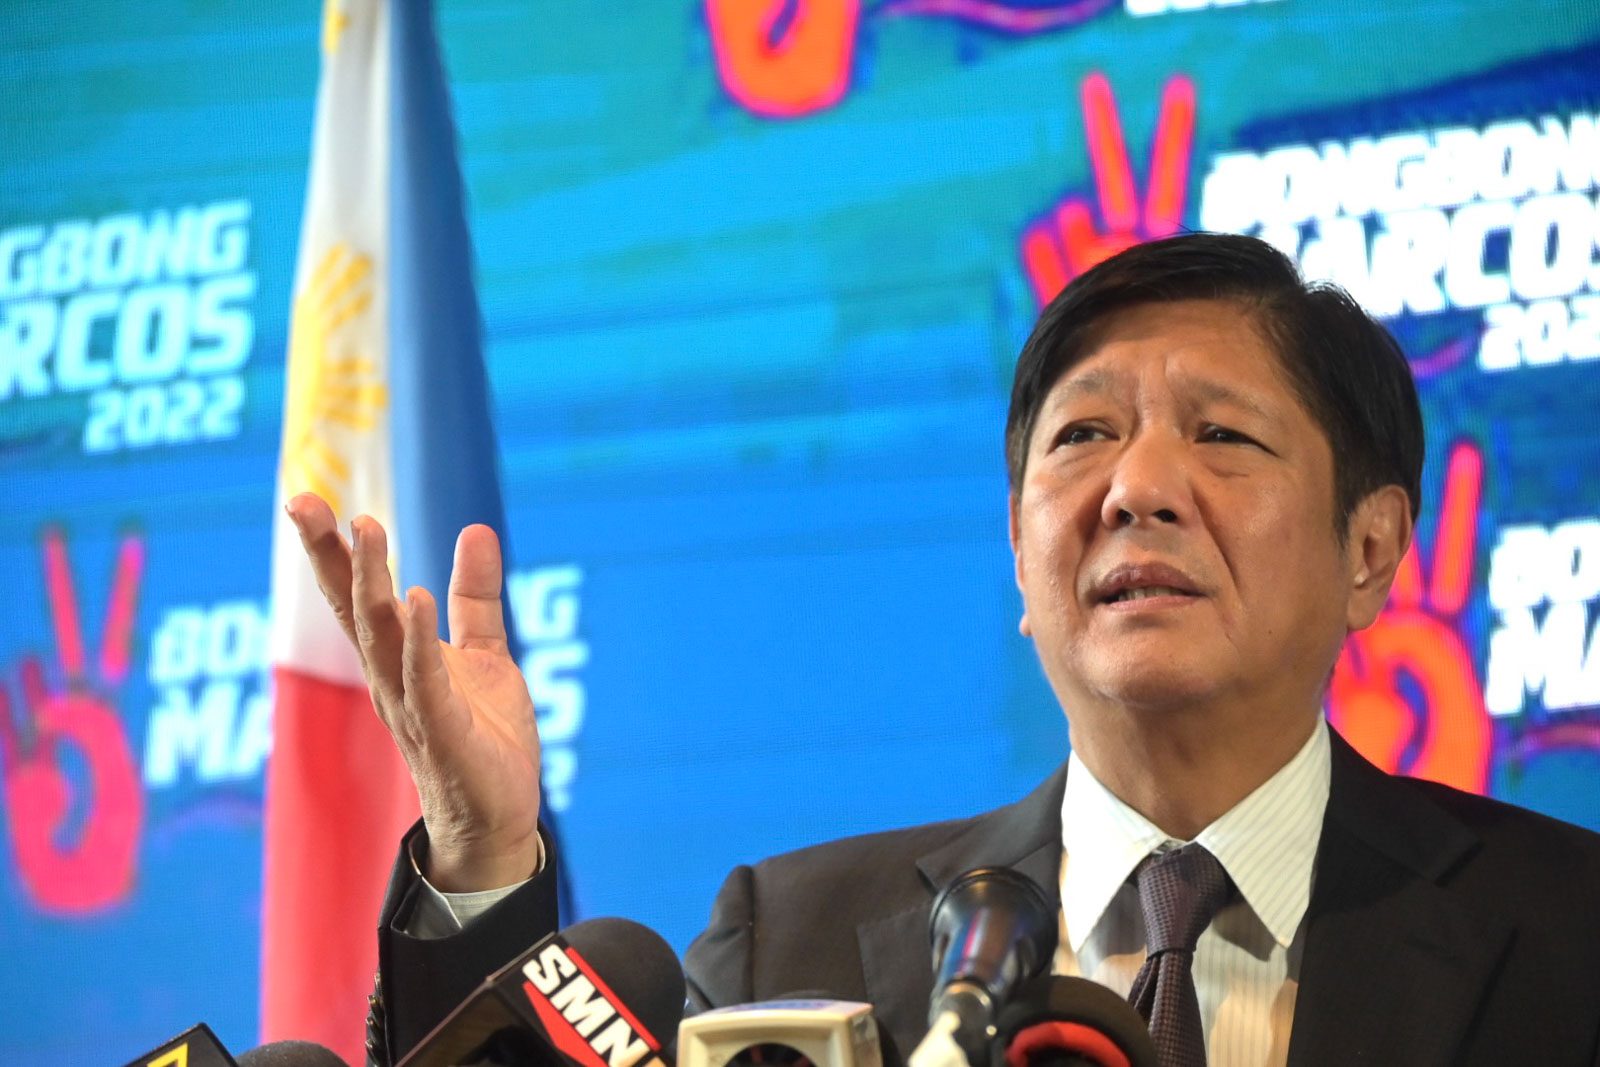 Marcos vows to thwart interference from outside powers